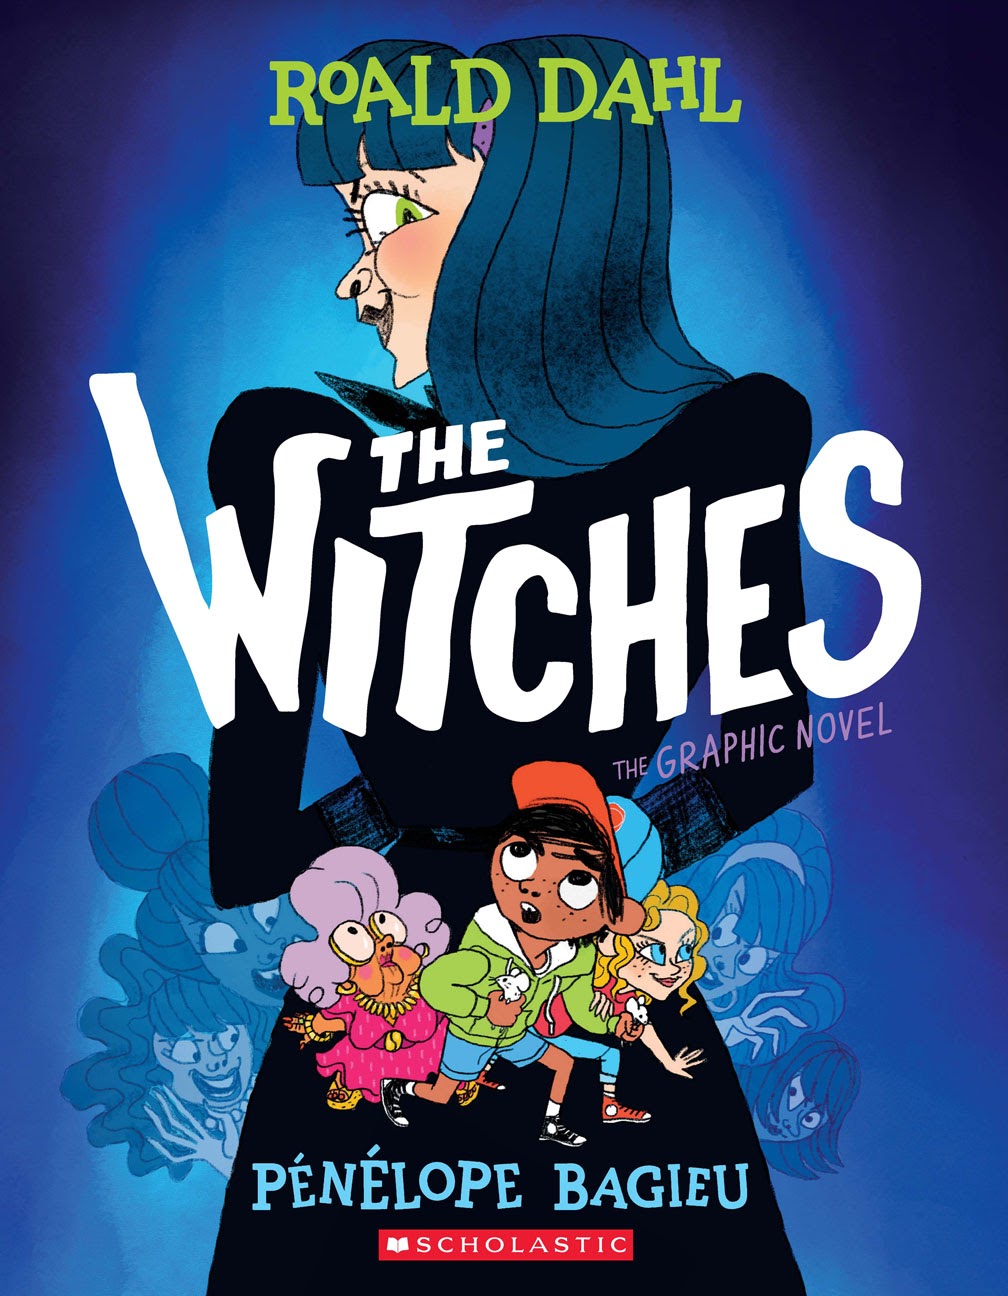 Read online The Witches comic -  Issue # TPB (Part 1) - 1